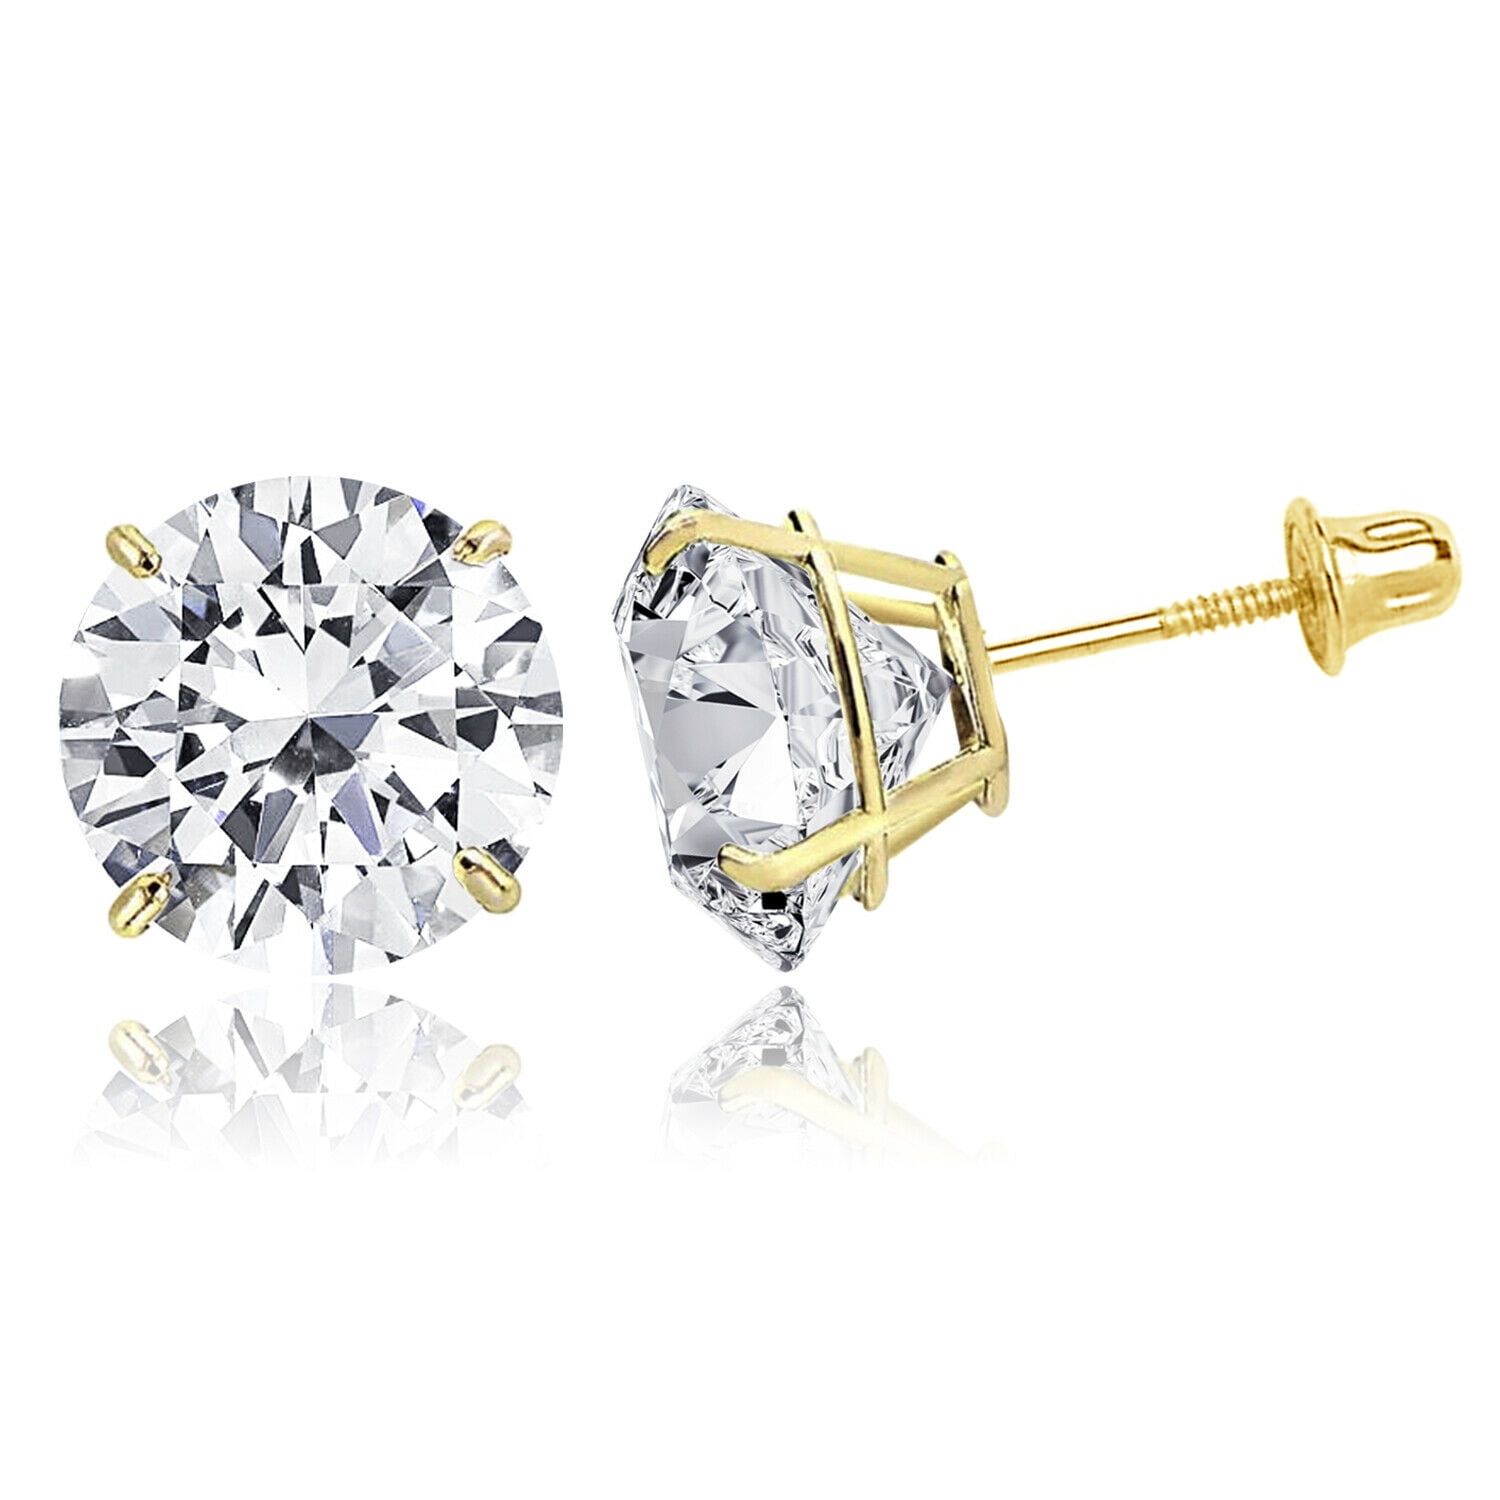 14K Yellow Gold 6mm Square CZ Post Earrings Solid 6 mm 6 mm Stud Earrings Jewelry 